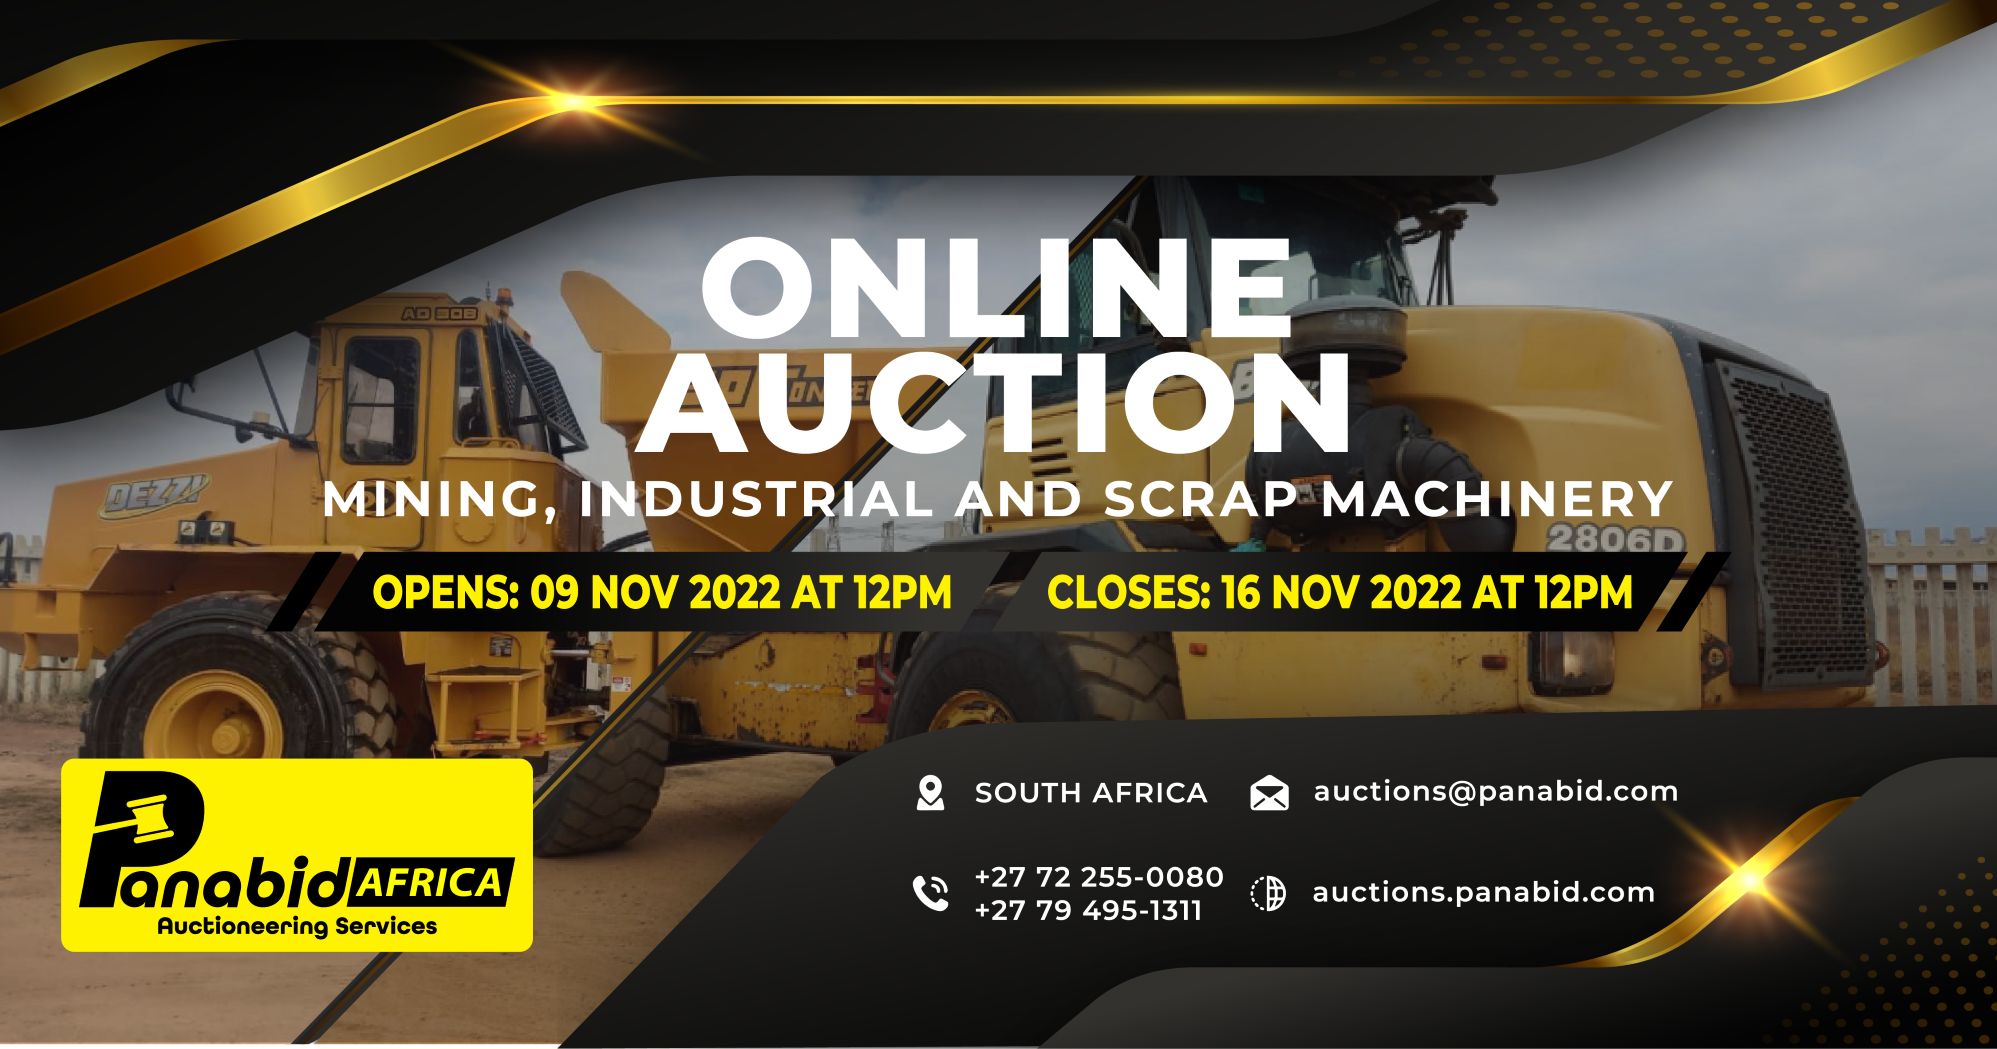 ONLINE AUCTION: INDUSTRIAL, MINING AND SCRAP MACHINERY LOCATED IN SOUTH AFRICA